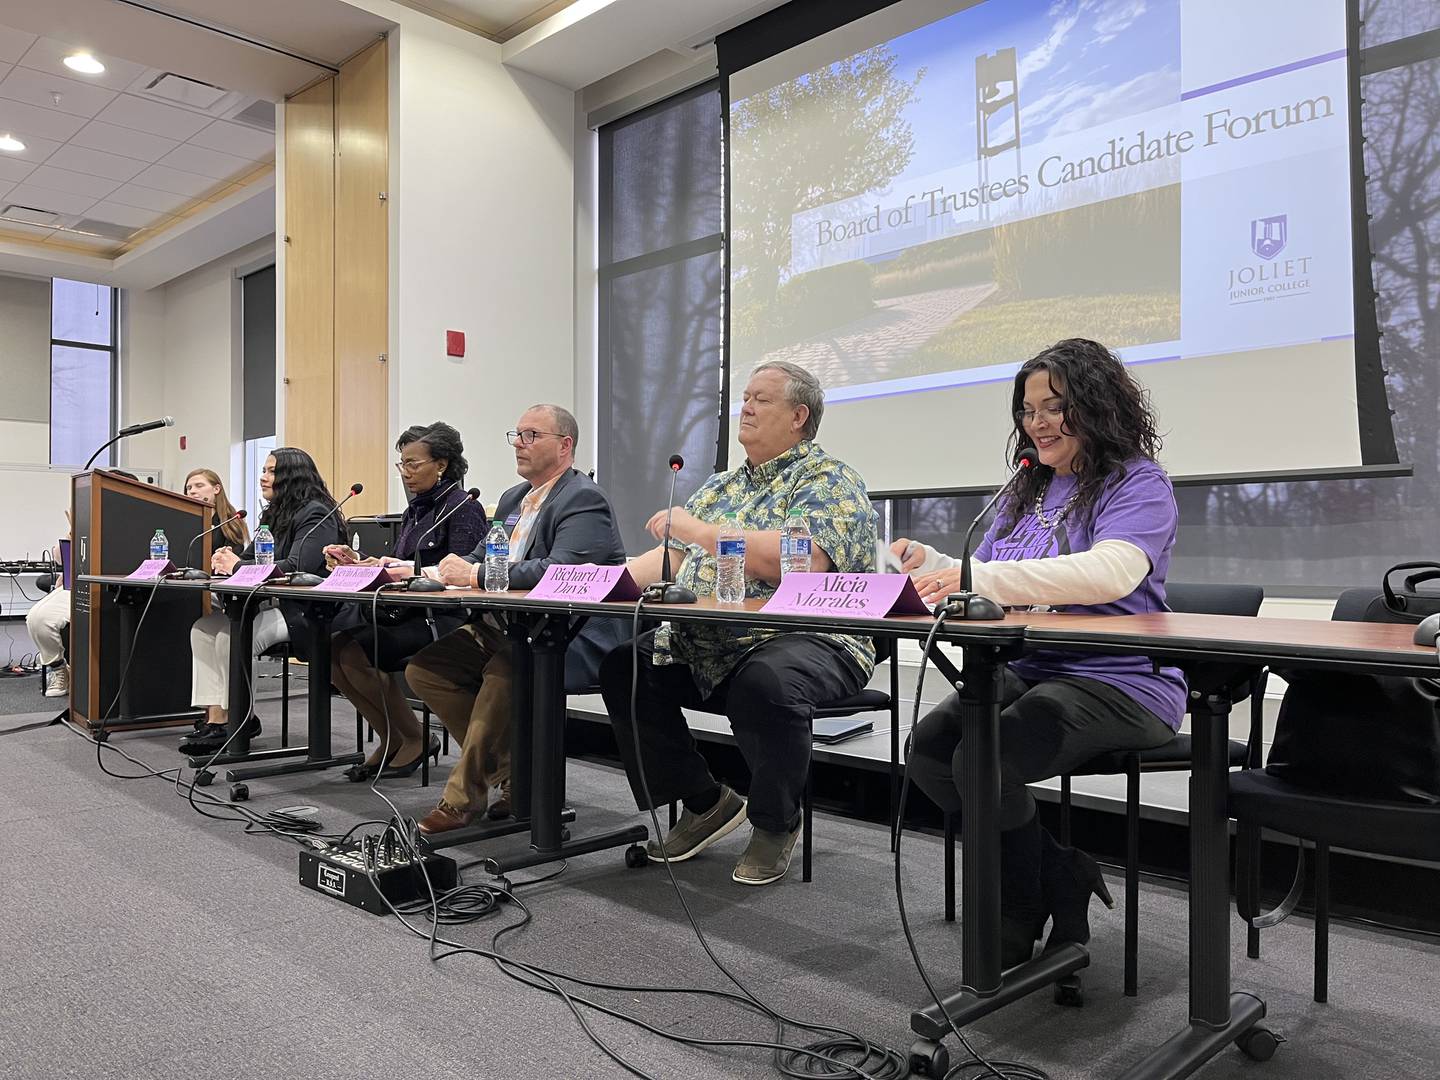 Joliet Junior College Board of Trustees candidates  Alicia Morales (right), Richard Davis, Kevin Kollins Hedemark, Diane Harris and Krystal Garcia Centeno at a candidate forum on Tuesday at the college.